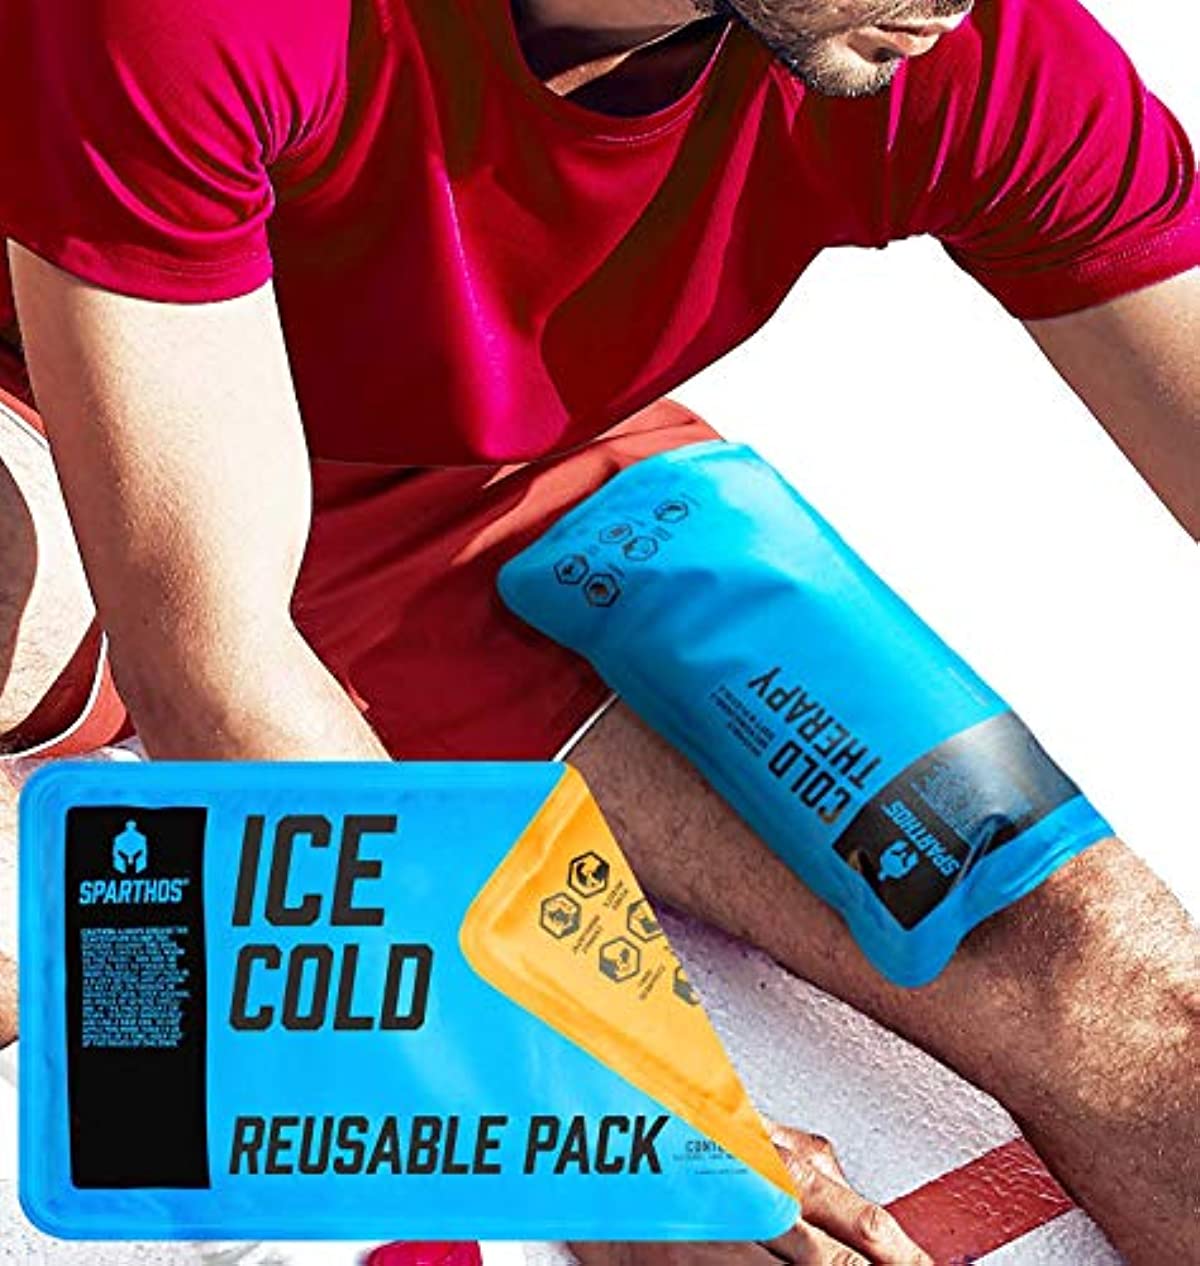 Sparthos Ice Packs for Injuries - Reusable Soft Gel Hot Cold Icepack - Medical First Aid Pain Relief - Flexible Pack - Instant Icing Compress Therapy - Fits Knee, Shoulder, Elbow (Medium, Pack of 1)